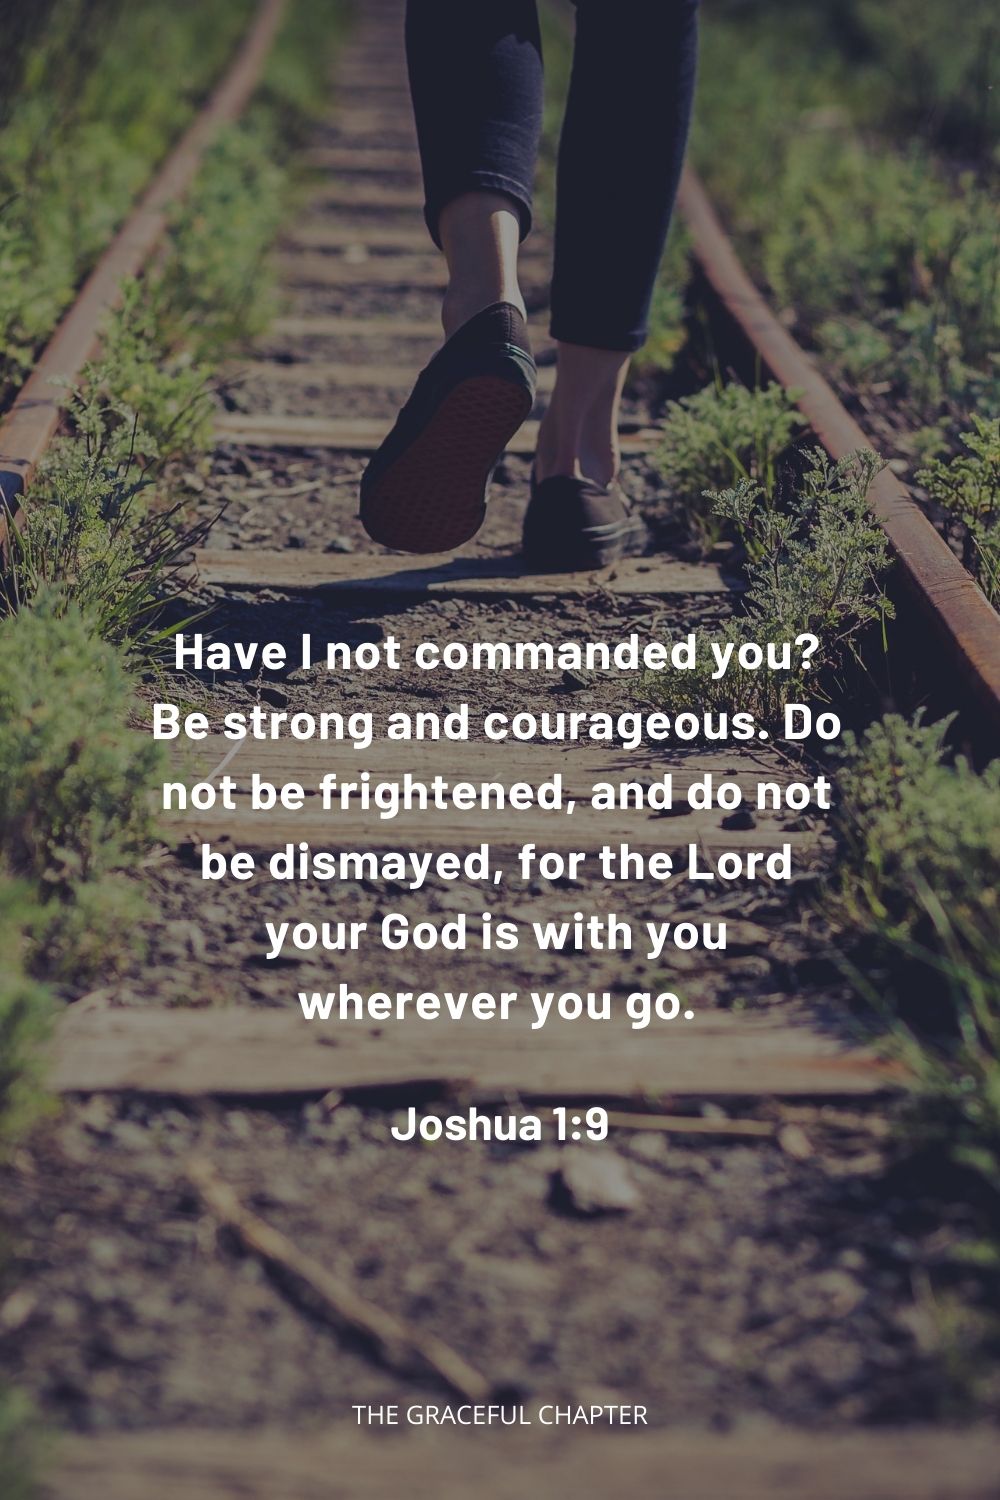 Have I not commanded you? Be strong and courageous. Do not be frightened, and do not be dismayed, for the Lord your God is with you wherever you go. Joshua 1:9